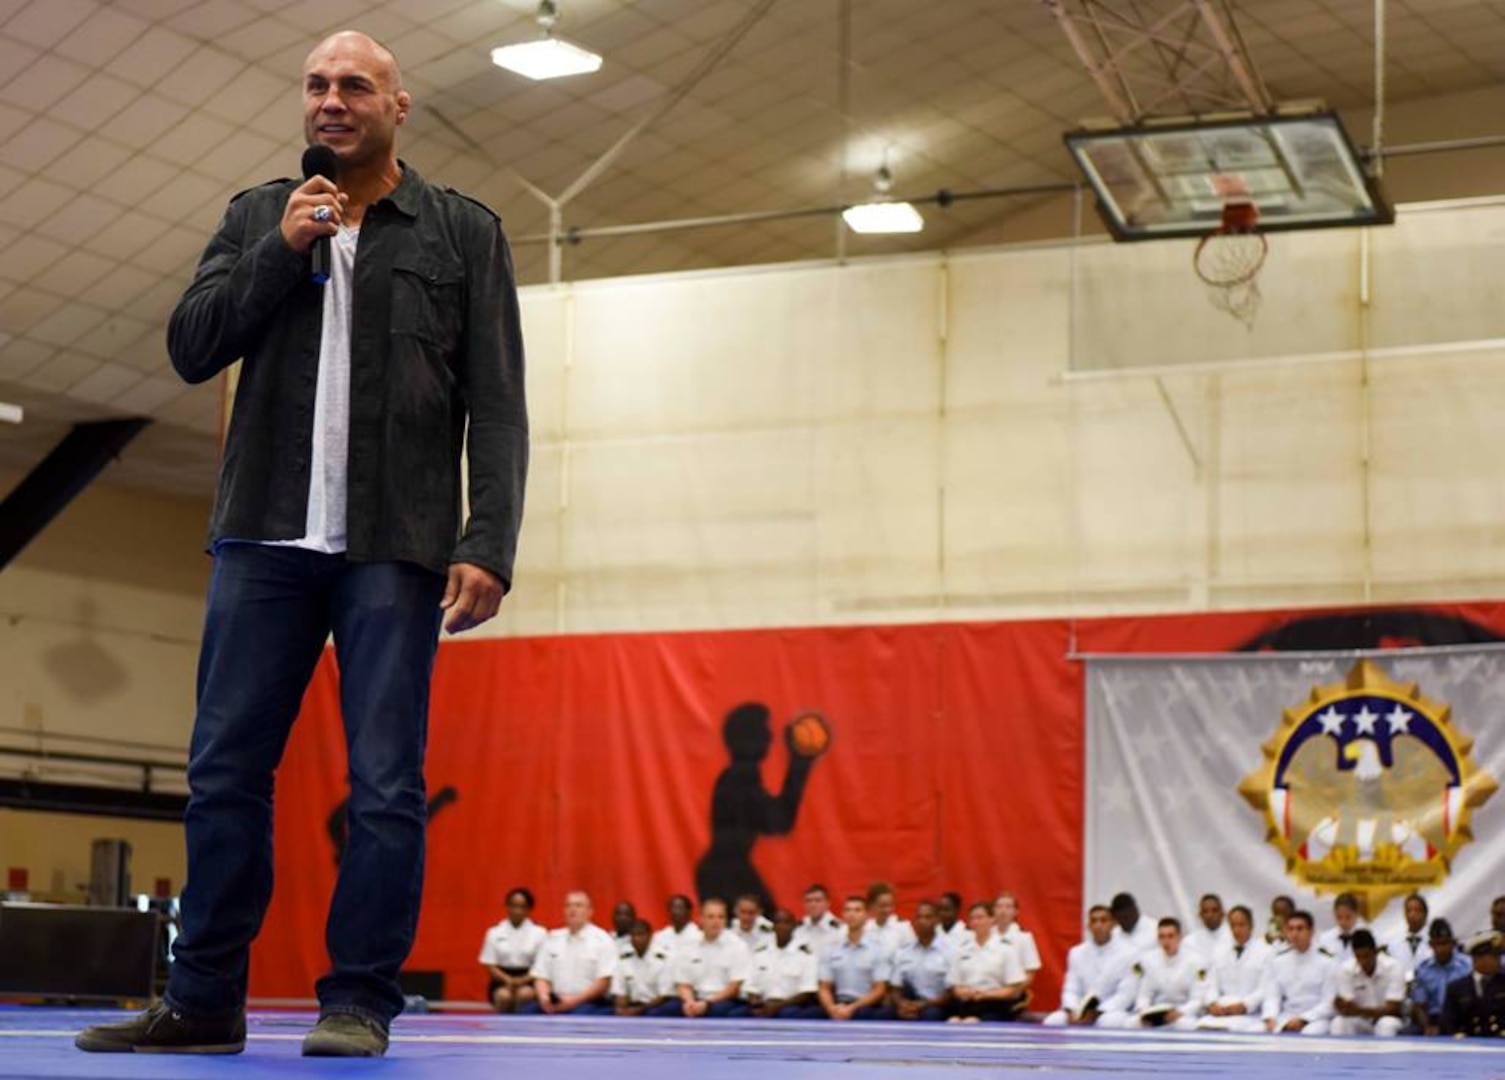 "It was here on this post back in 1985 where I got my start on the Army's wrestling team which allowed me to represent the U.S. at the CISM championships in Sicily," said Randy Couture, five-time Ultimate Fighting Championship title-holder and former U.S. Army Wrestling Team CISM competitor. "It was at that time in my life when I learned I could compete at an international level. It's an honor for me to be back here and I'm very much looking forward to the competition."